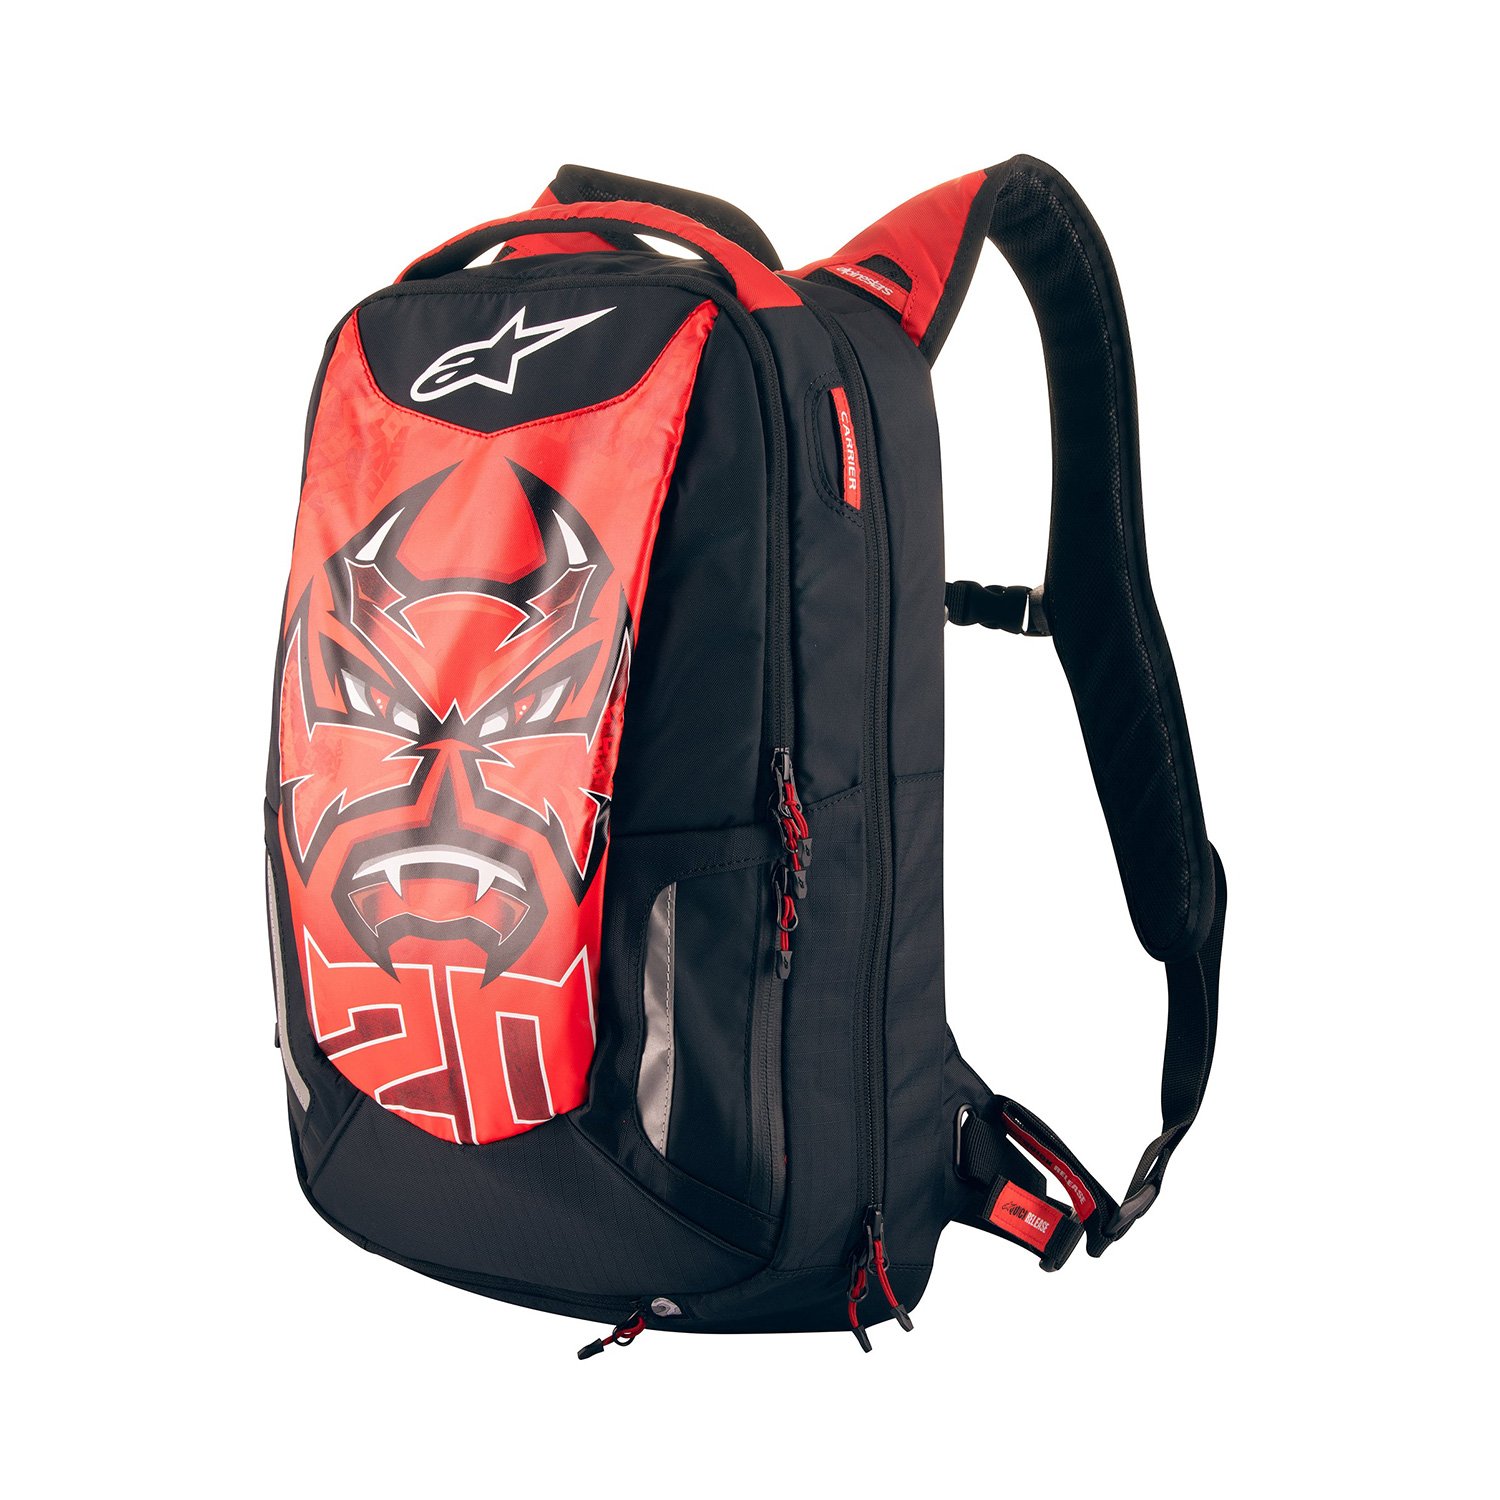 Image of Alpinestars FQ20 City Hunter Backpack Black Bright Red White Taille